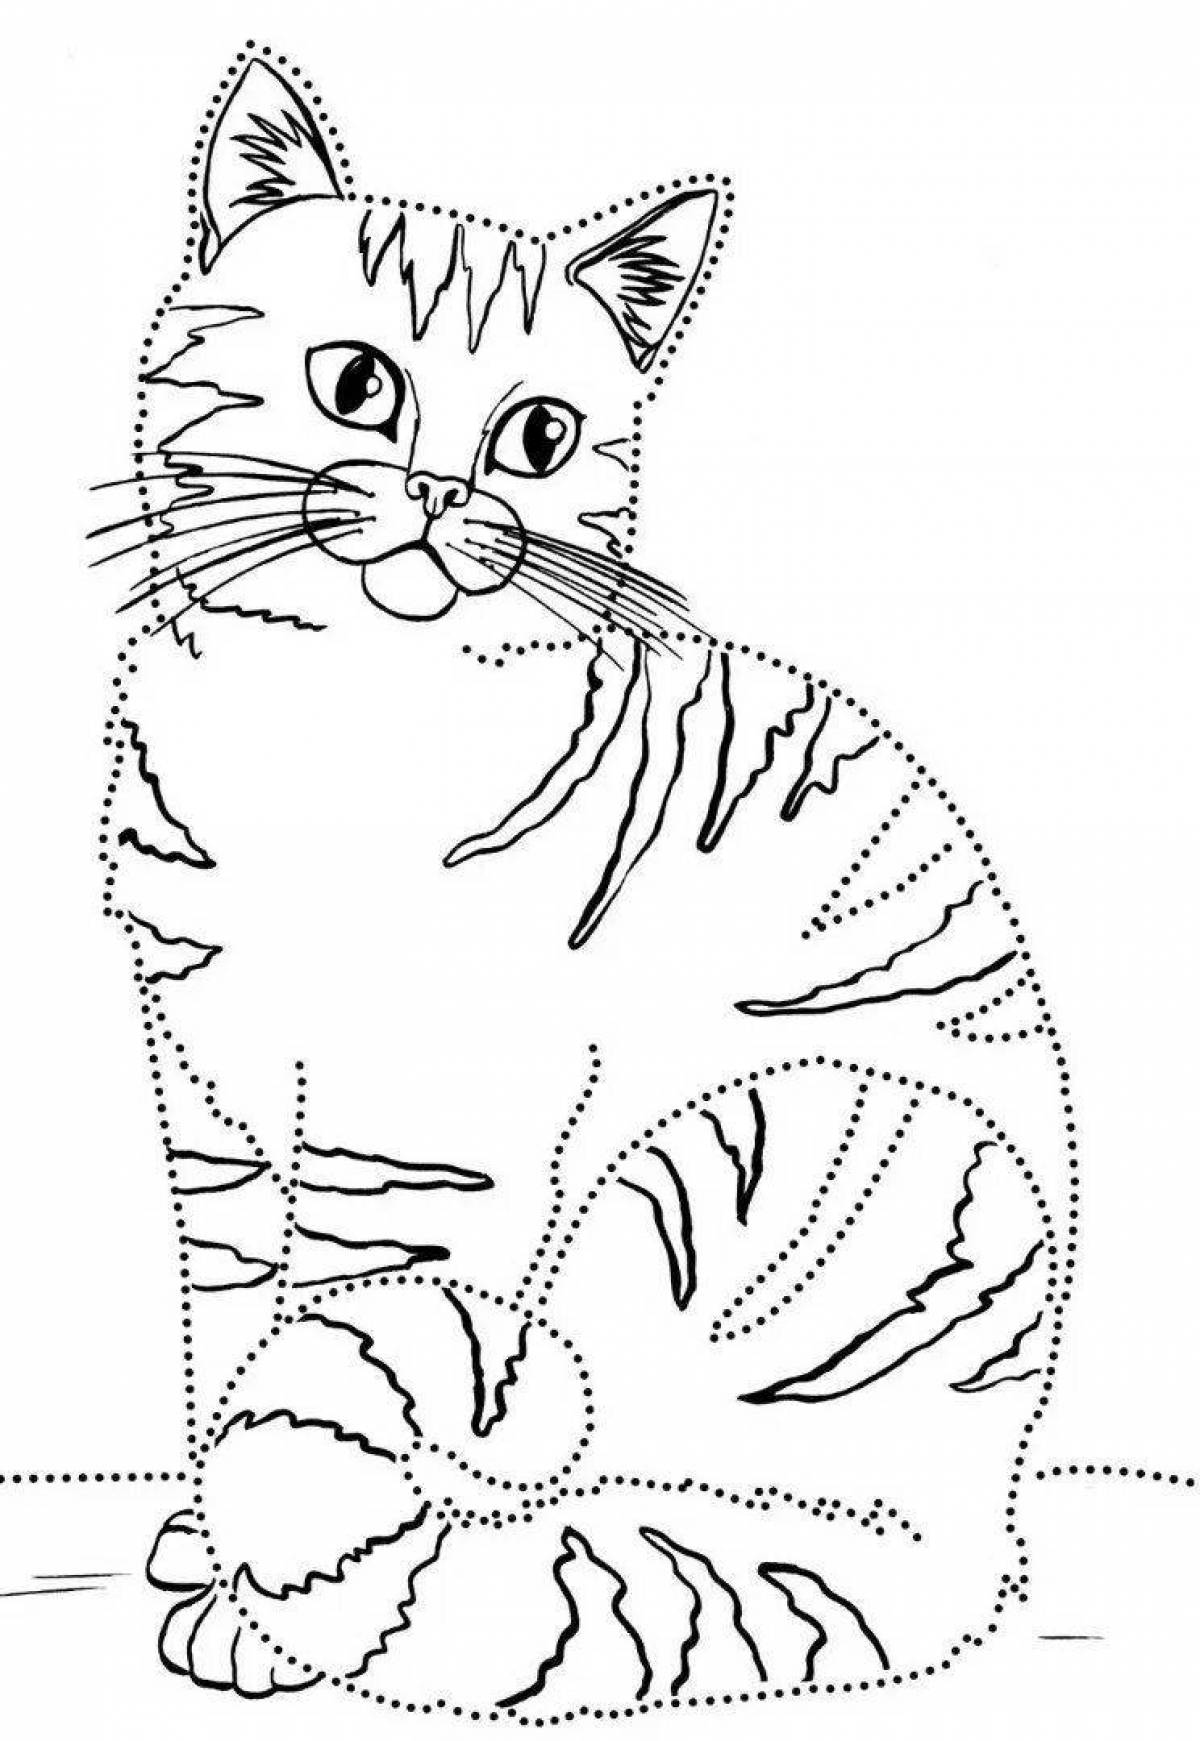 Coloring page freaky 7 year old kitten